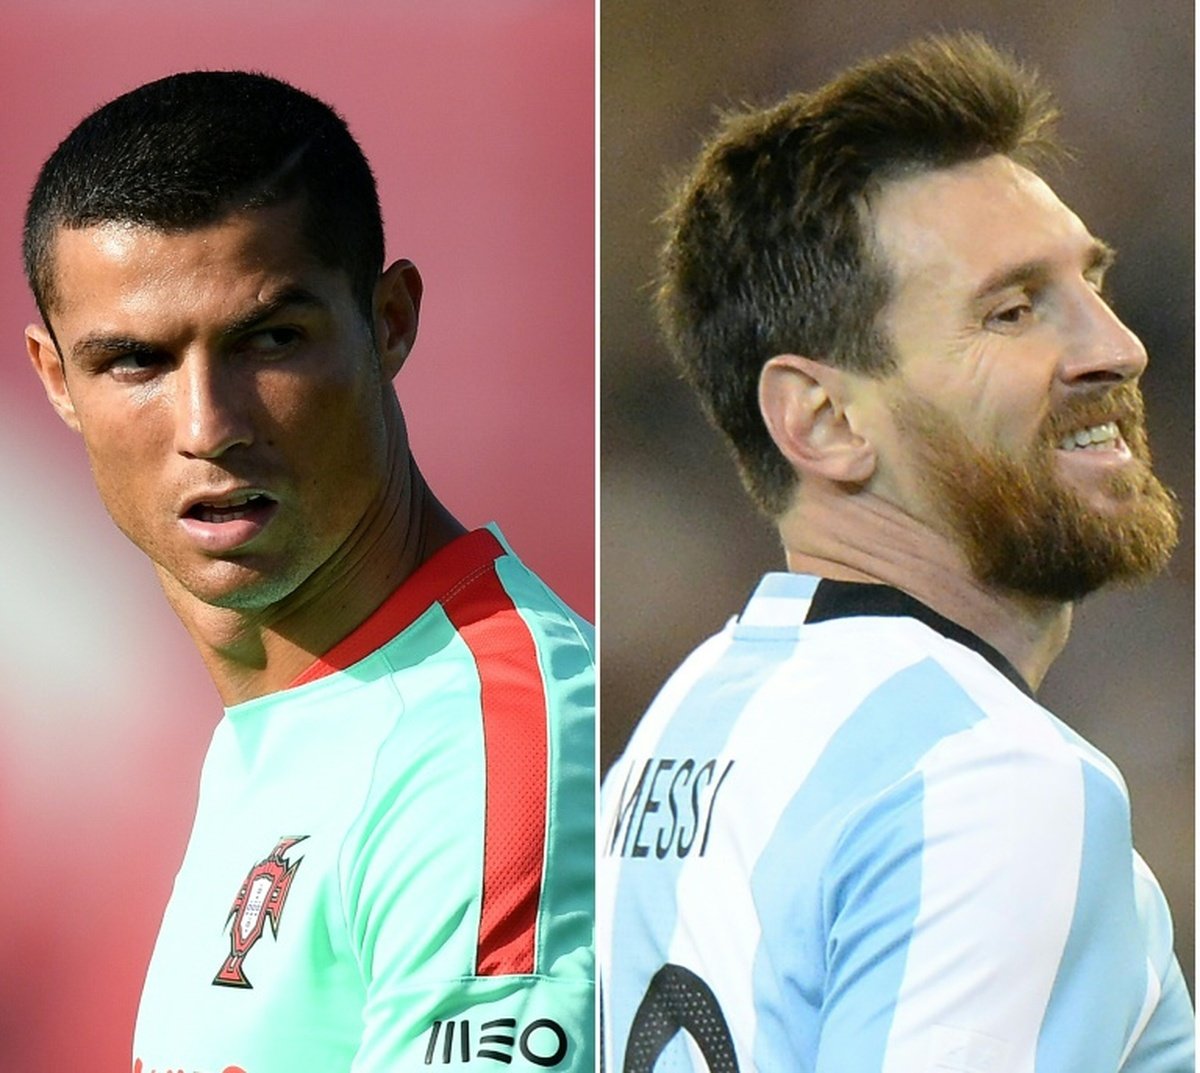 Four players who could be the next Messi or Ronaldo